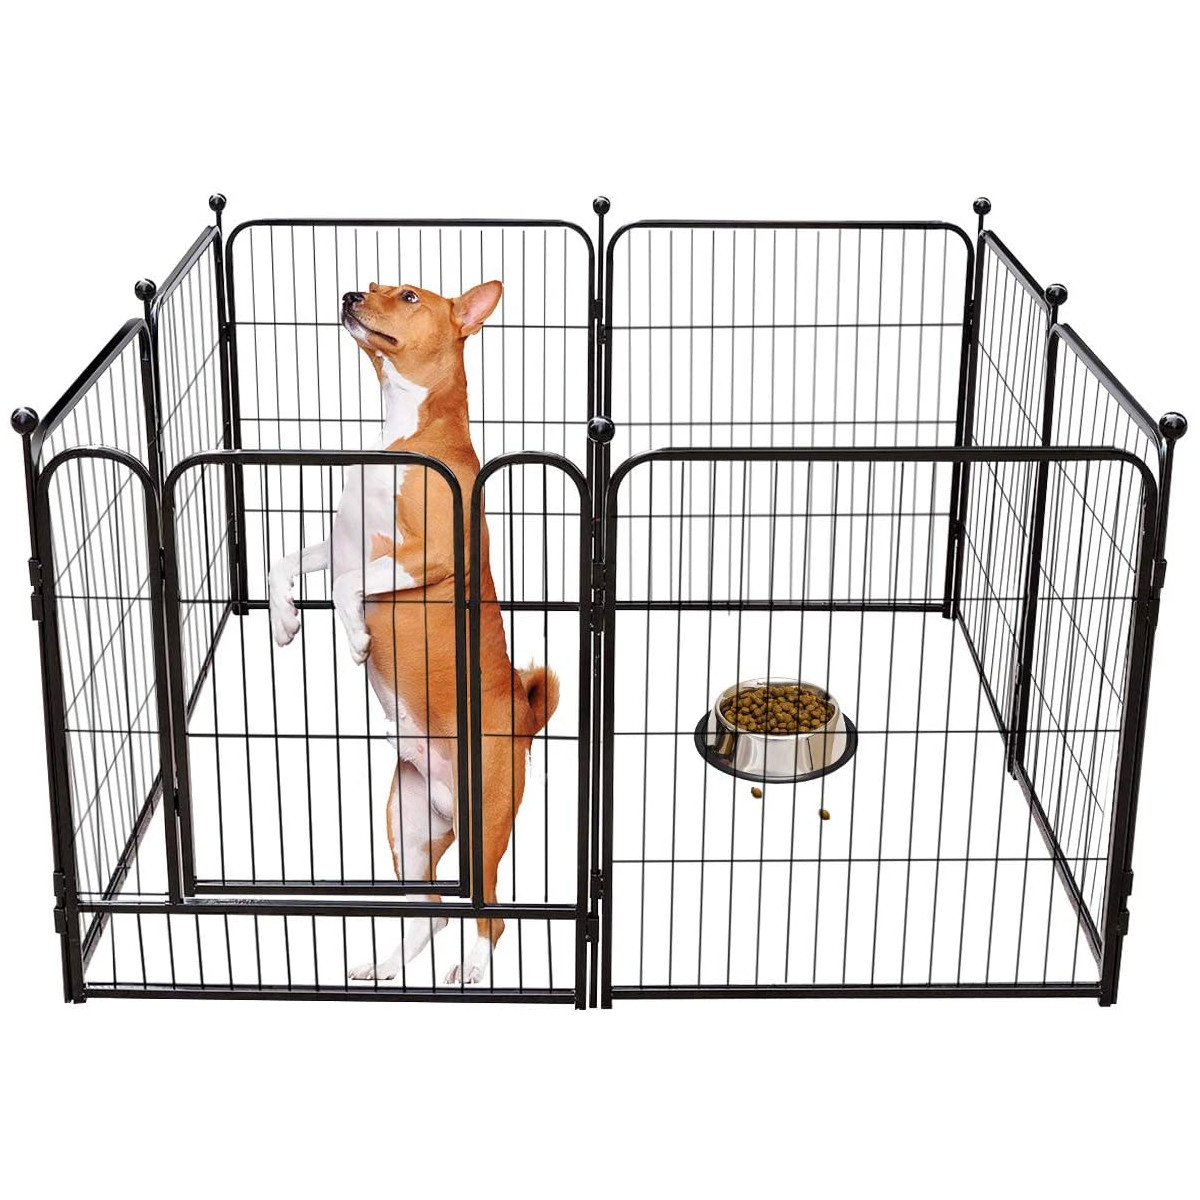 PawGiant-Dog-Pen-8-Panels-40quot-Height-RV-Dog-Fence-Outdoor-Playpens-Exercise-Pen-for-Dogs-Metal-Pr-1828107-9